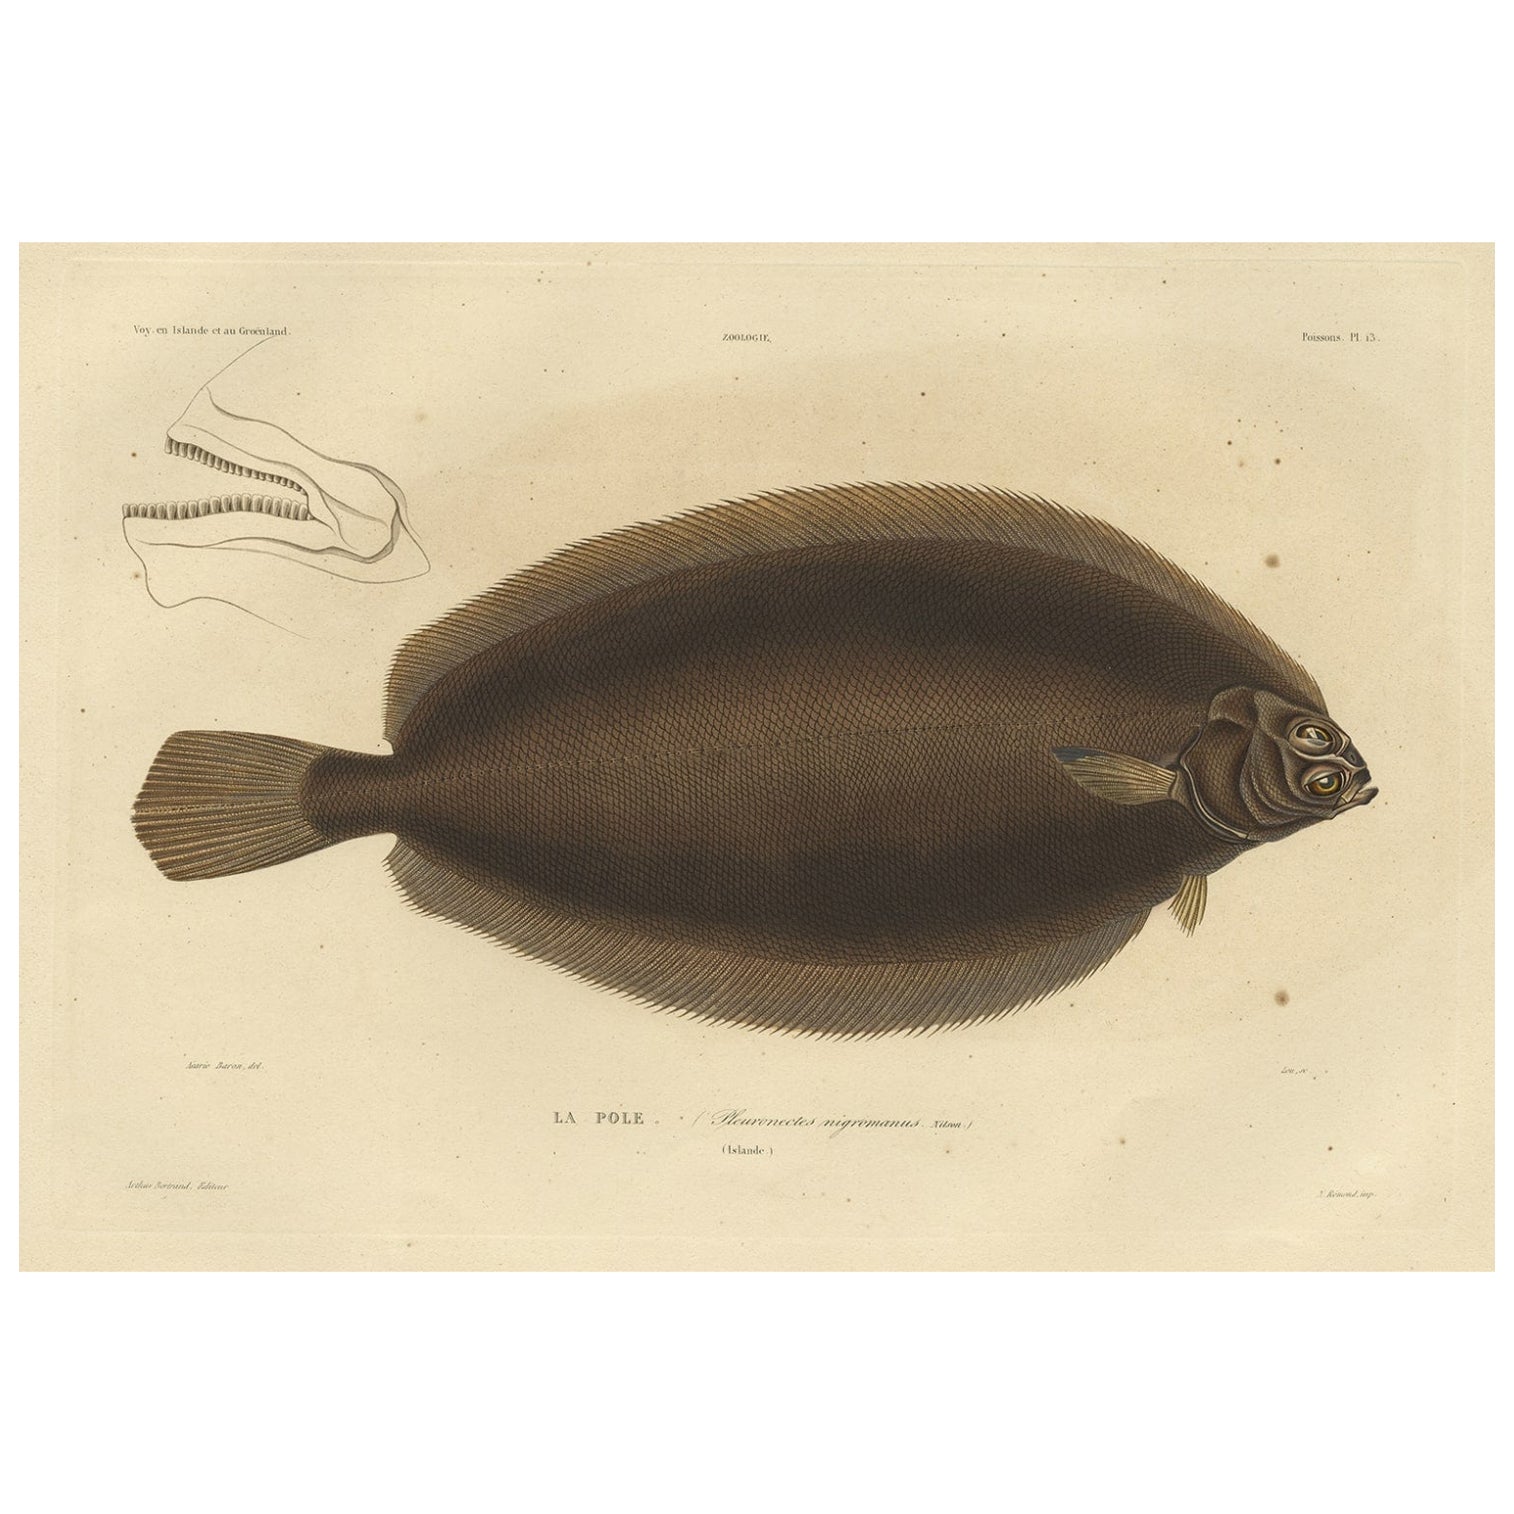 Old Rare Fish Print of the Witch Flounder or Torbay Sole, 1842